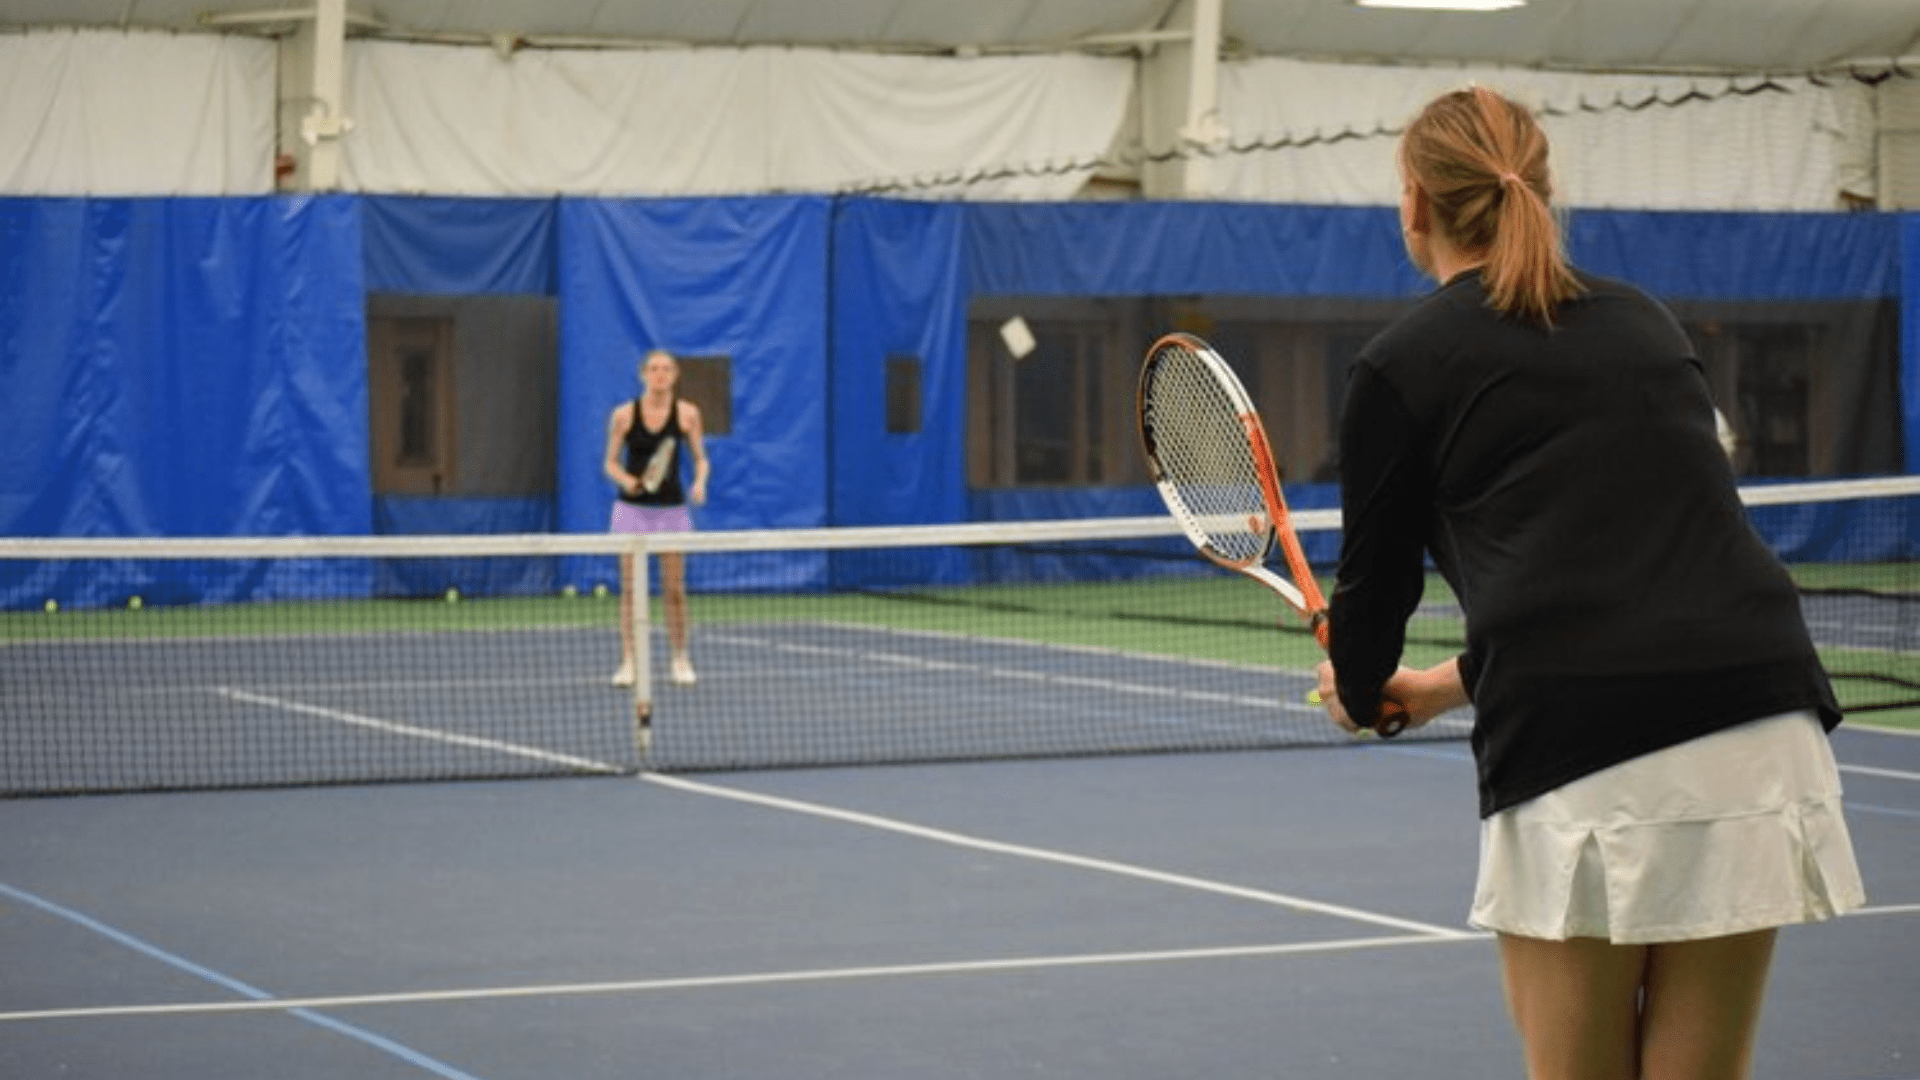 Extreme Drop-In Tennis Clinic Event